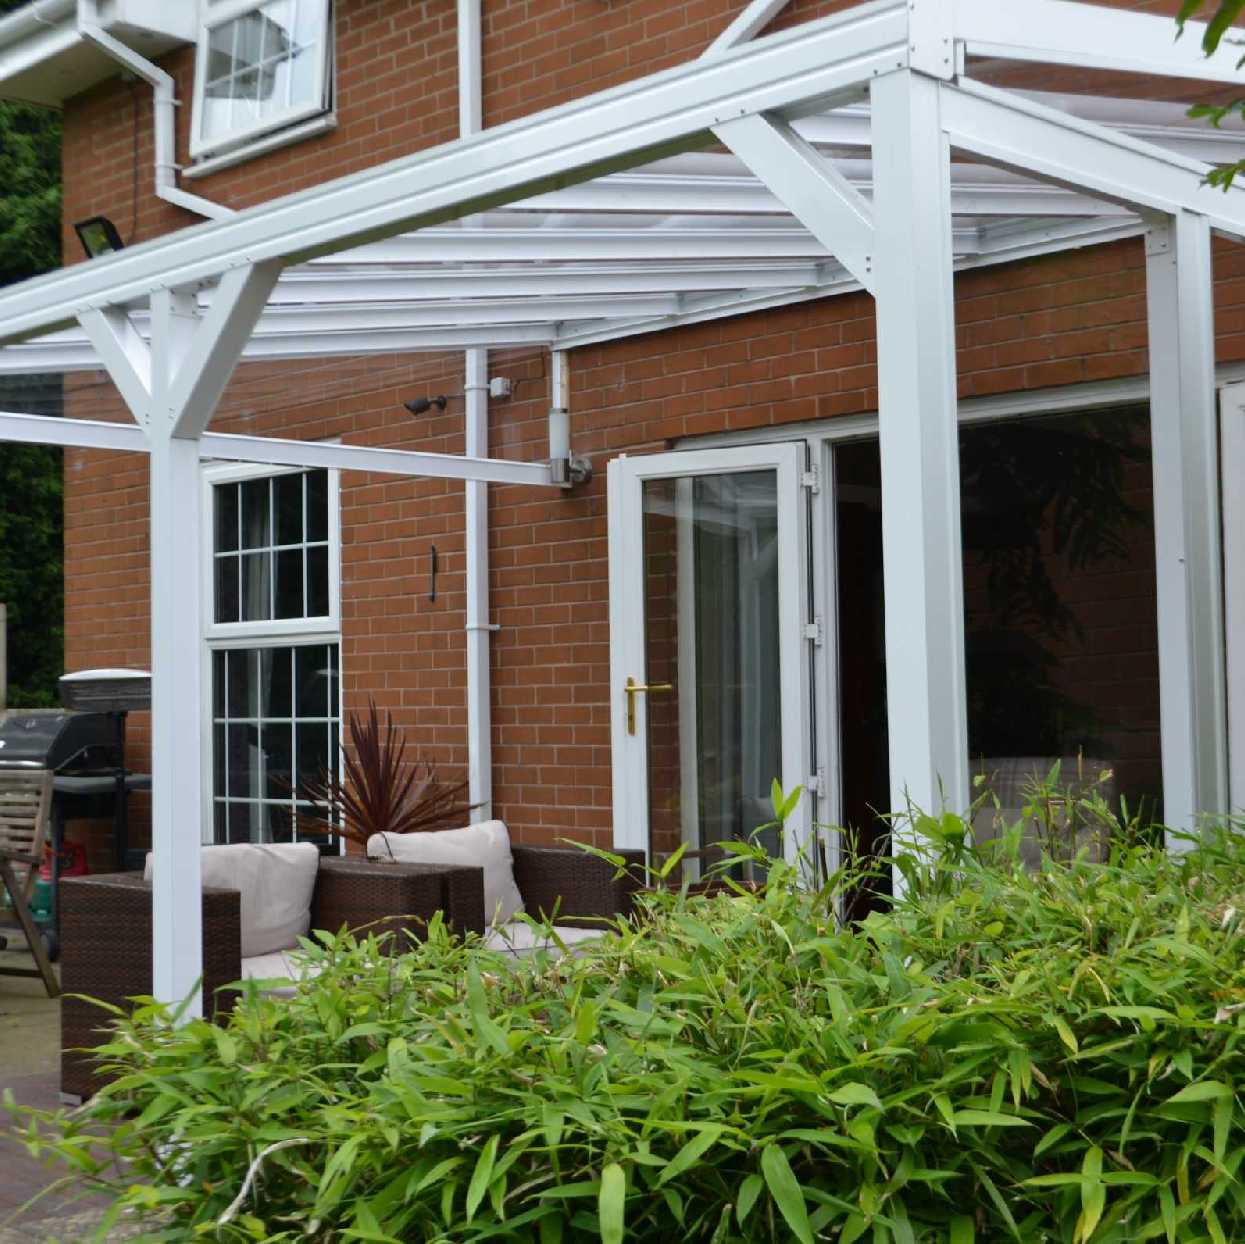 Omega Smart Lean-To Canopy, White with 6mm Glass Clear Plate Polycarbonate Glazing - 7.0m (W) x 1.5m (P), (4) Supporting Posts from Omega Build